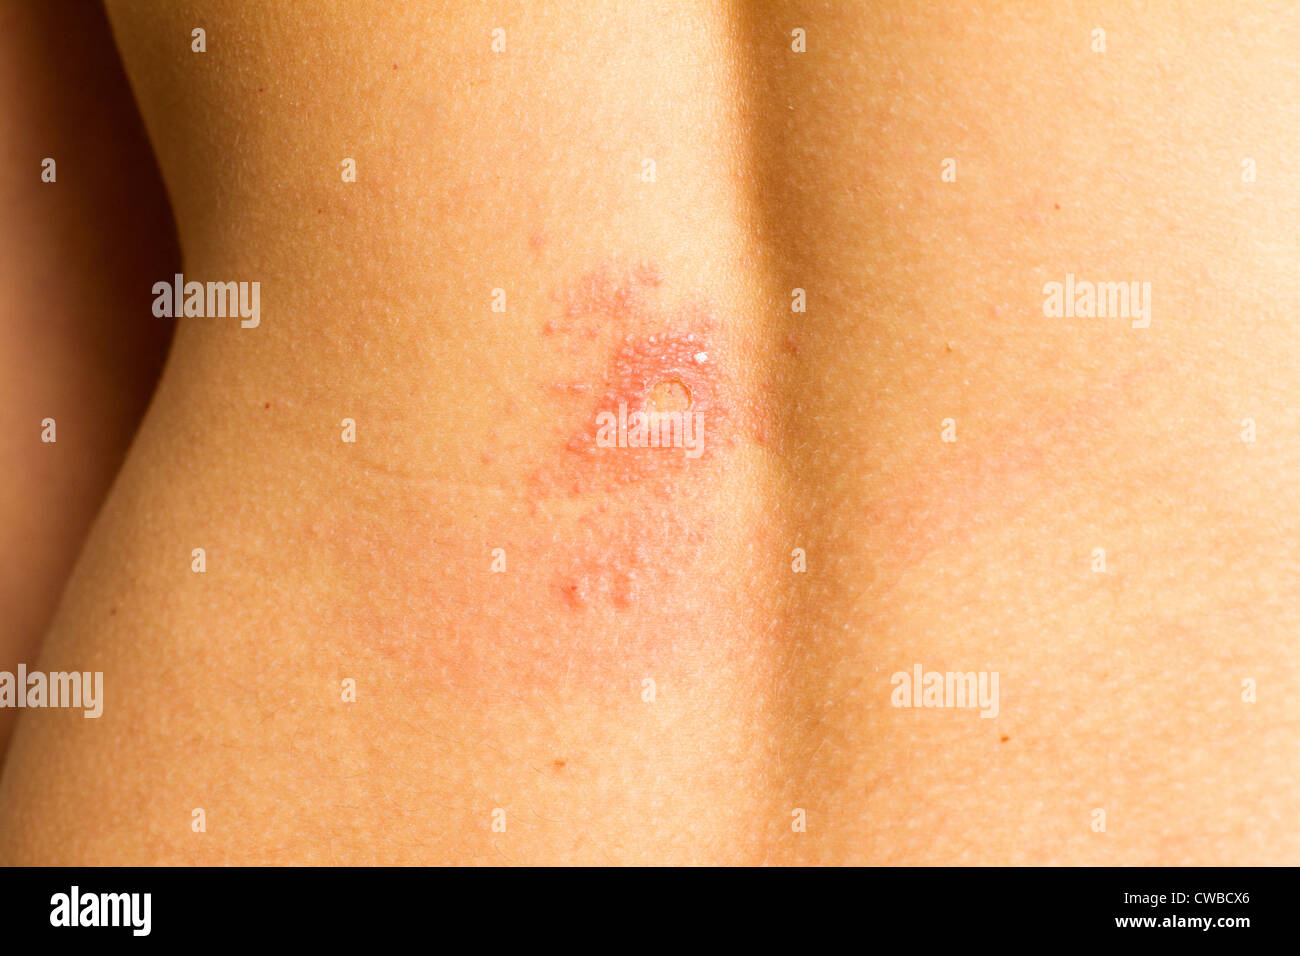 Wound after the removal of a mole. Allergy formed around the wound caused by a band-aid Stock Photo